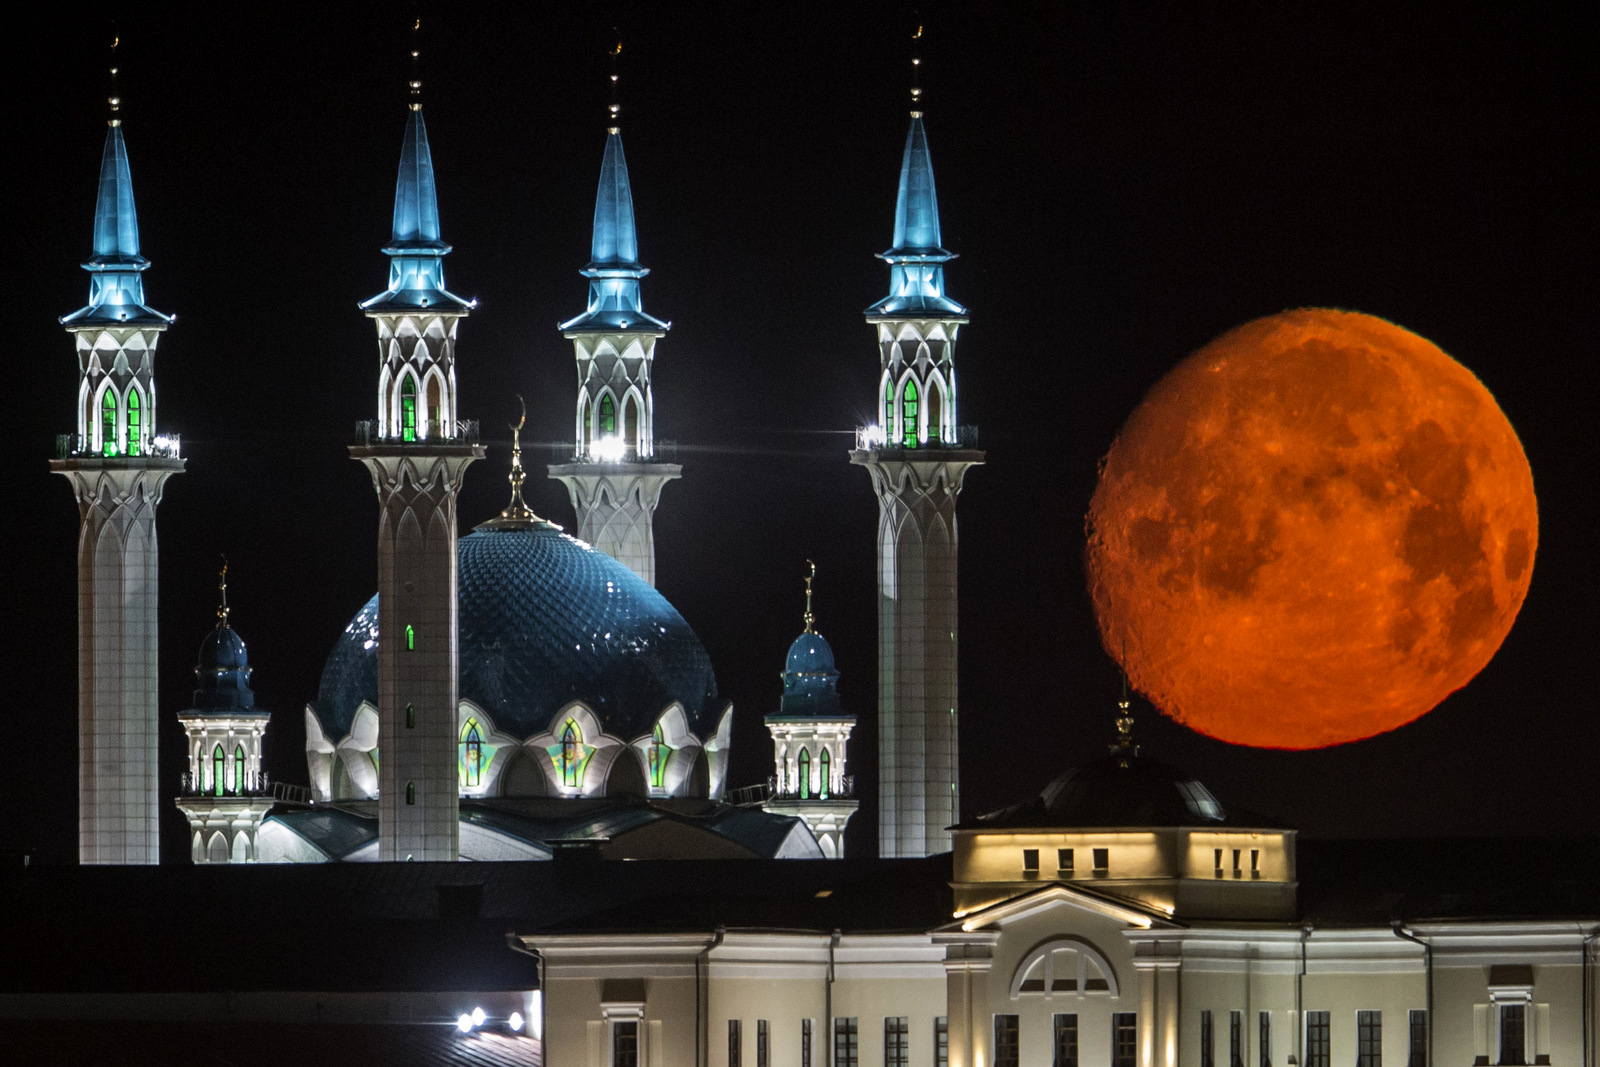 The full moon rises over the illuminated Kazan Kremlin with the Qol Sharif mosque illuminated in Kazan, the capital of Tatarstan, located in Russia's Volga River area about 700 km (450 miles) east of Moscow, July, 29, 2015. (AP Photo/Denis Tyrin)